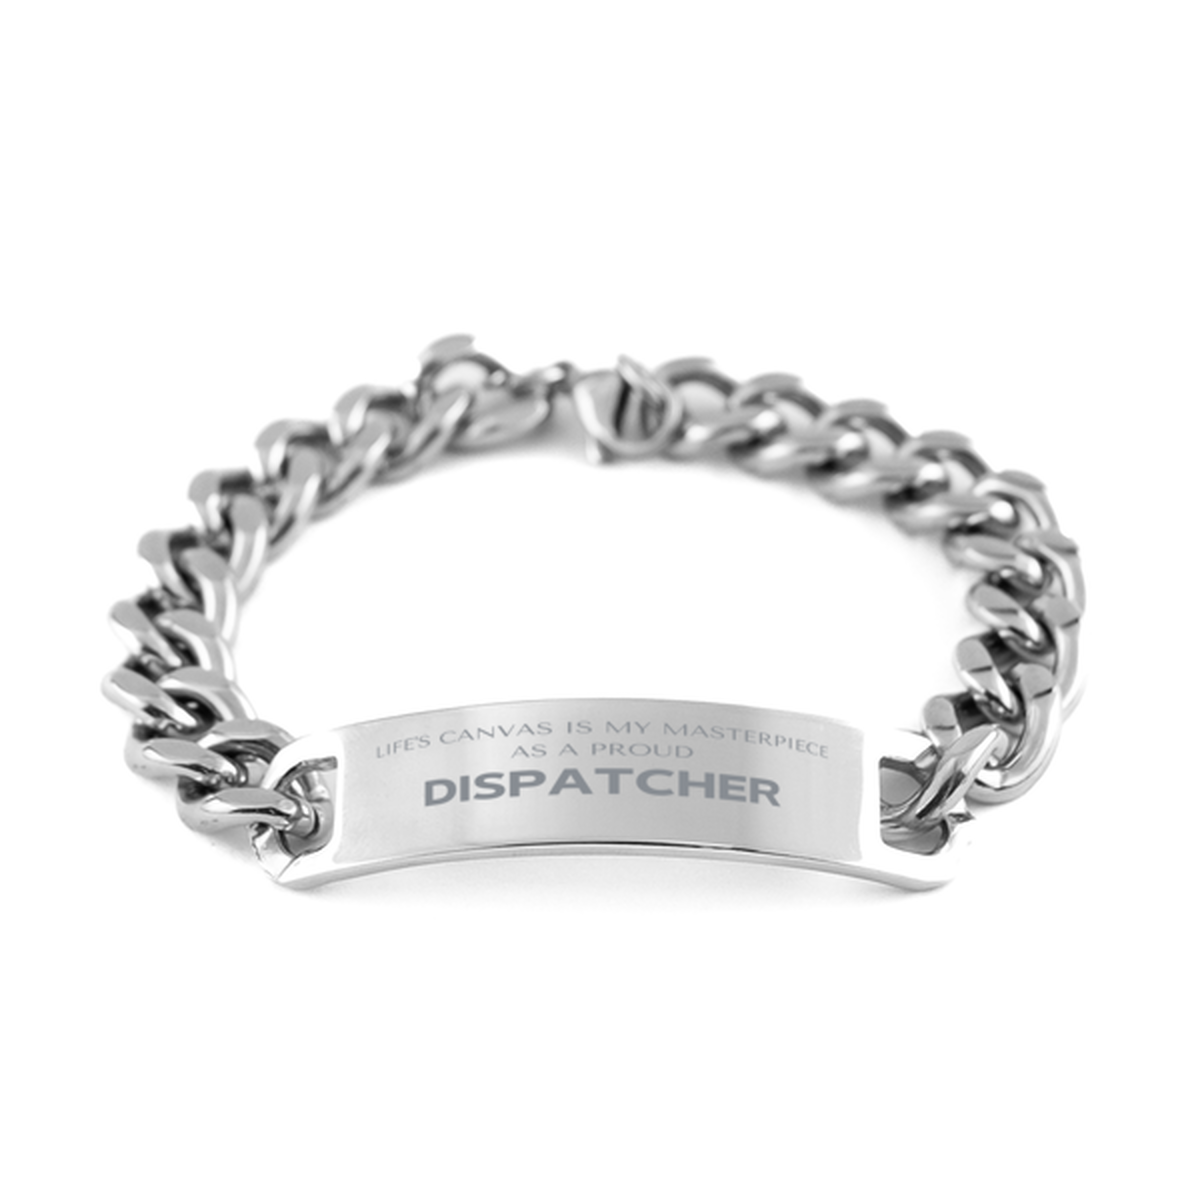 Proud Dispatcher Gifts, Life's canvas is my masterpiece, Epic Birthday Christmas Unique Cuban Chain Stainless Steel Bracelet For Dispatcher, Coworkers, Men, Women, Friends